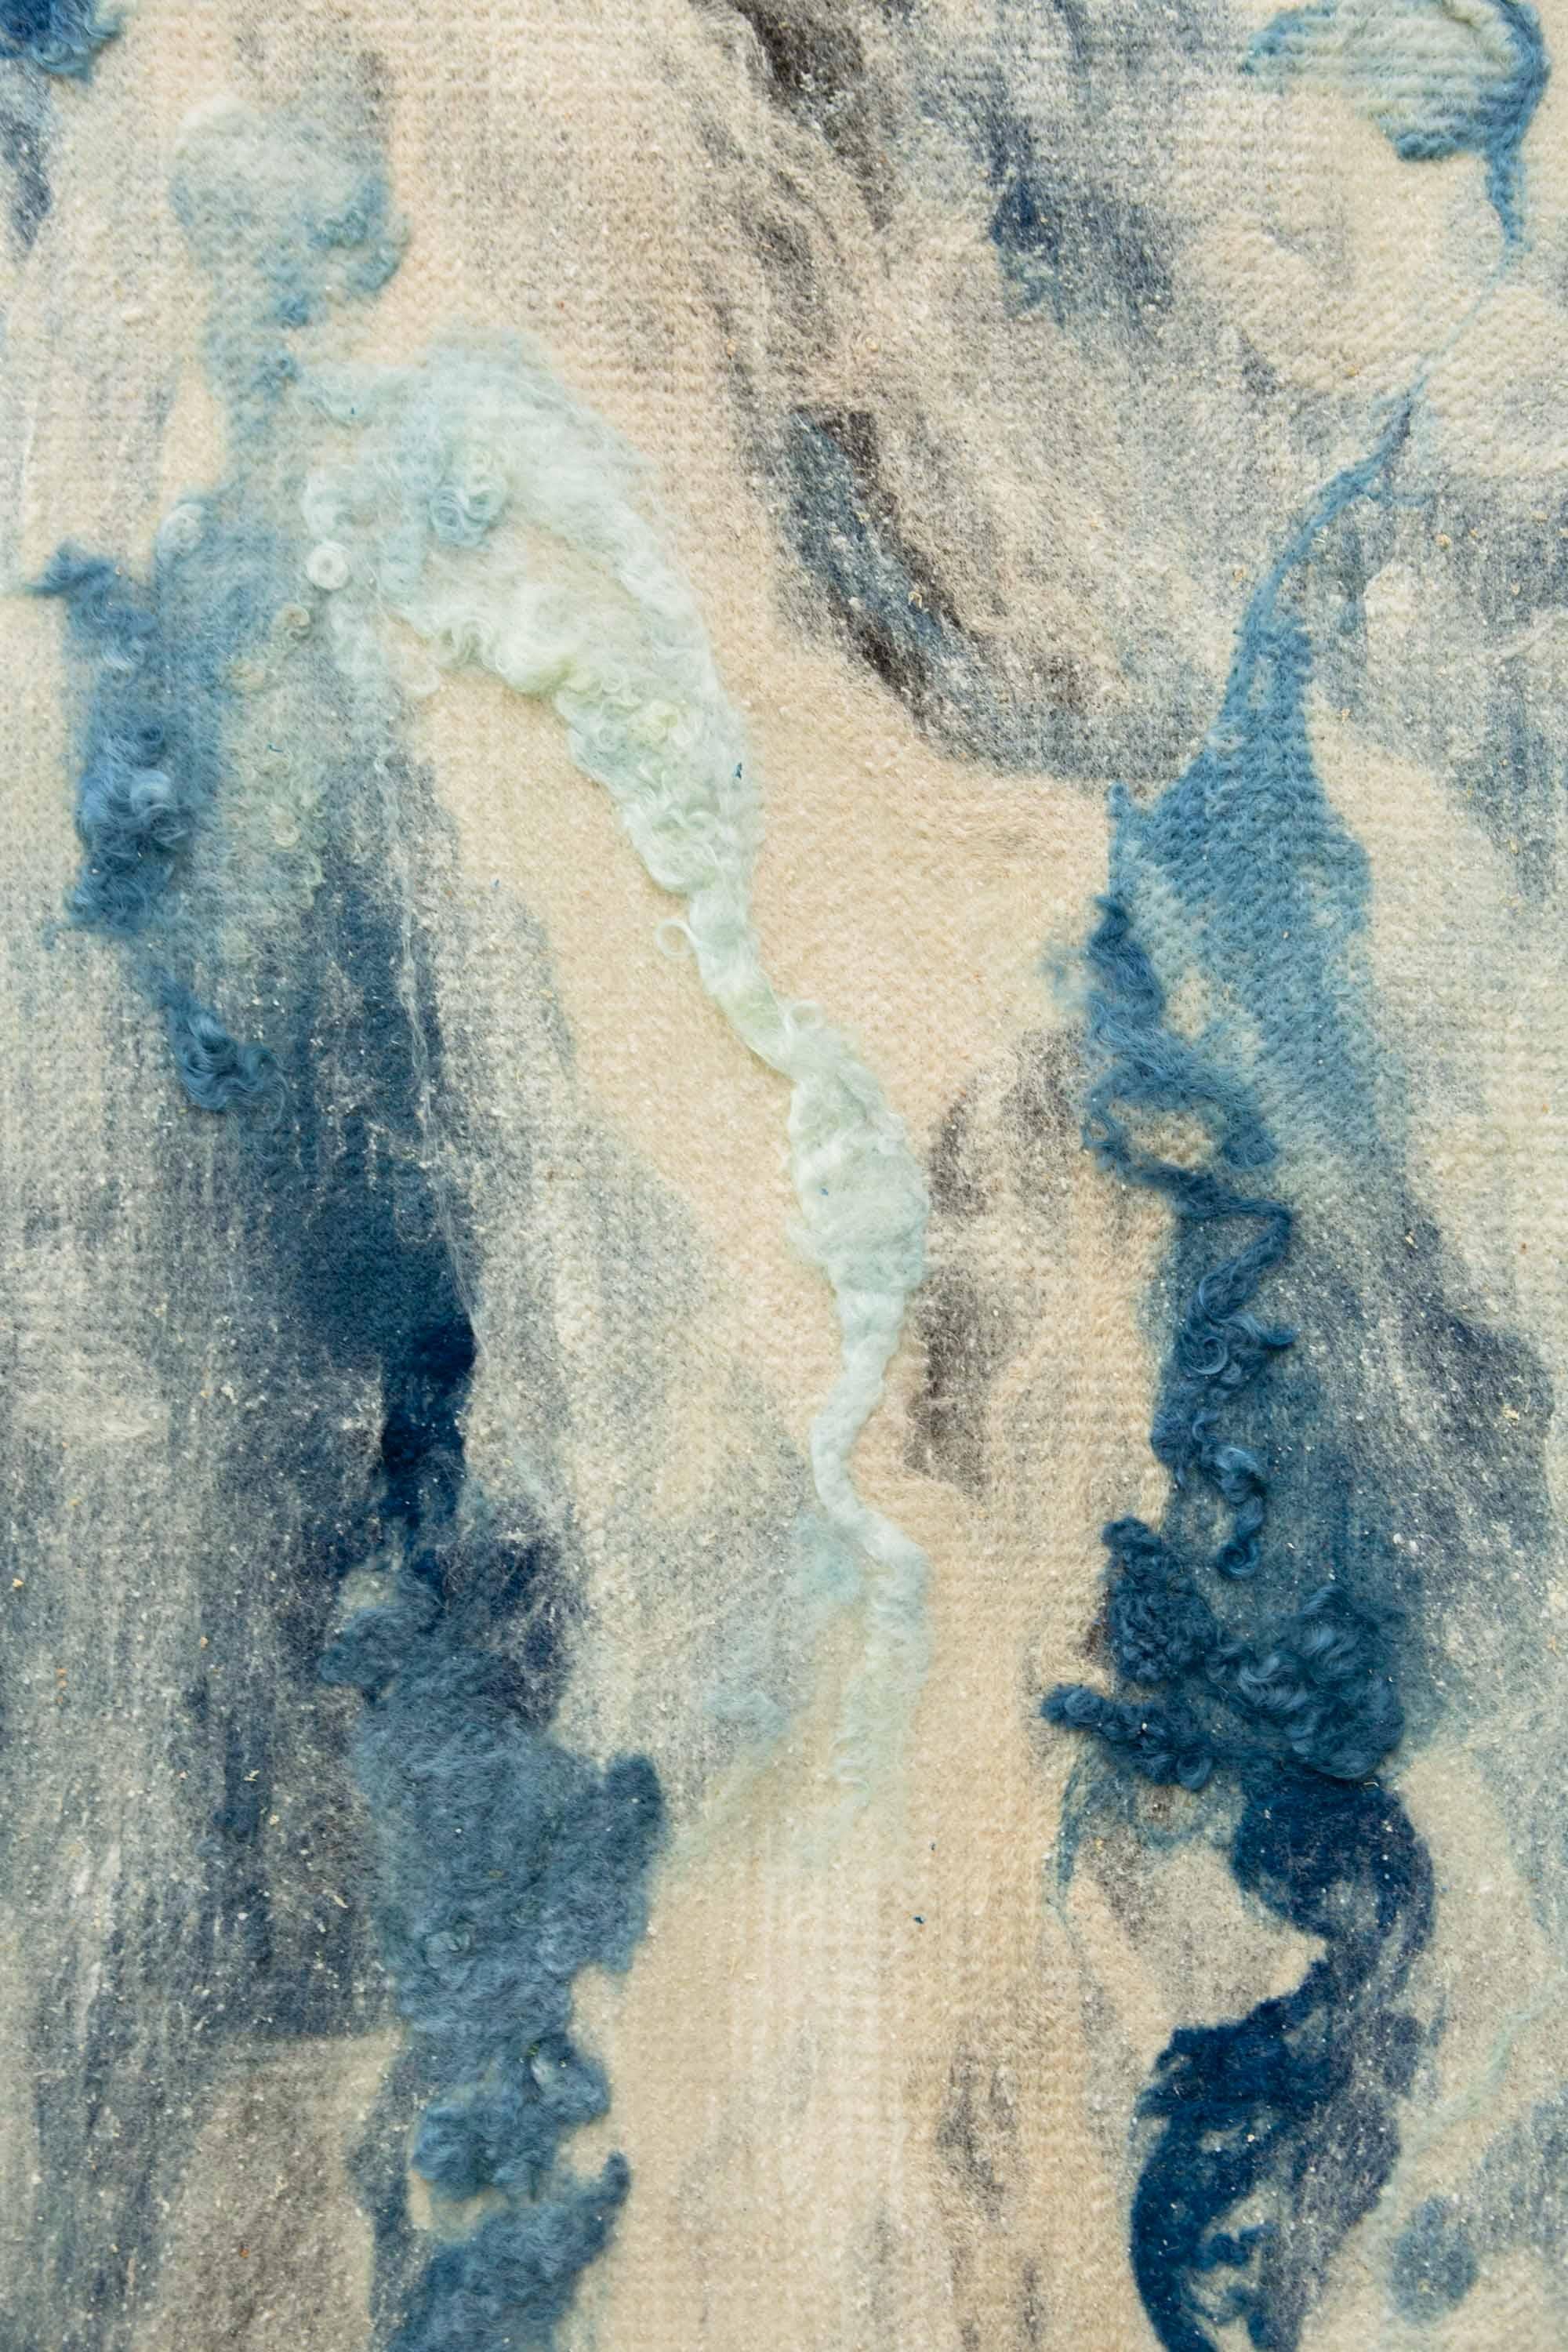 WATER FINDS A WAY, felted during the seemingly endless river of water that fell from the California sky during the winter of 2023, was painted with indigo vat dyed raw wool, seaweed carded with wool, and raw silk on a canvas of locally sourced wool.